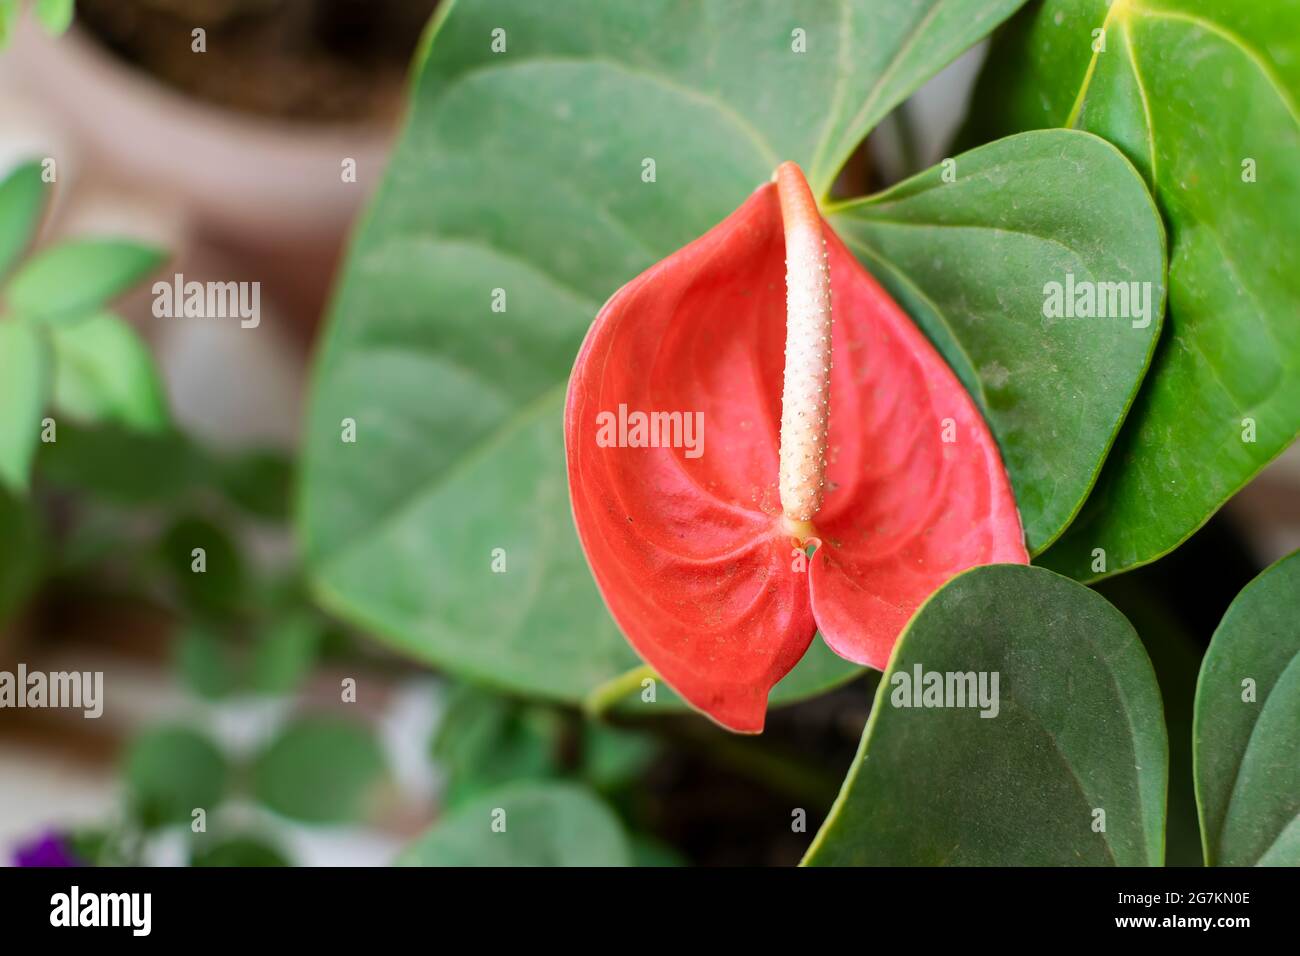 Red colored long lasting flower with leaves of anthurium house plant. Used selective focus. Stock Photo